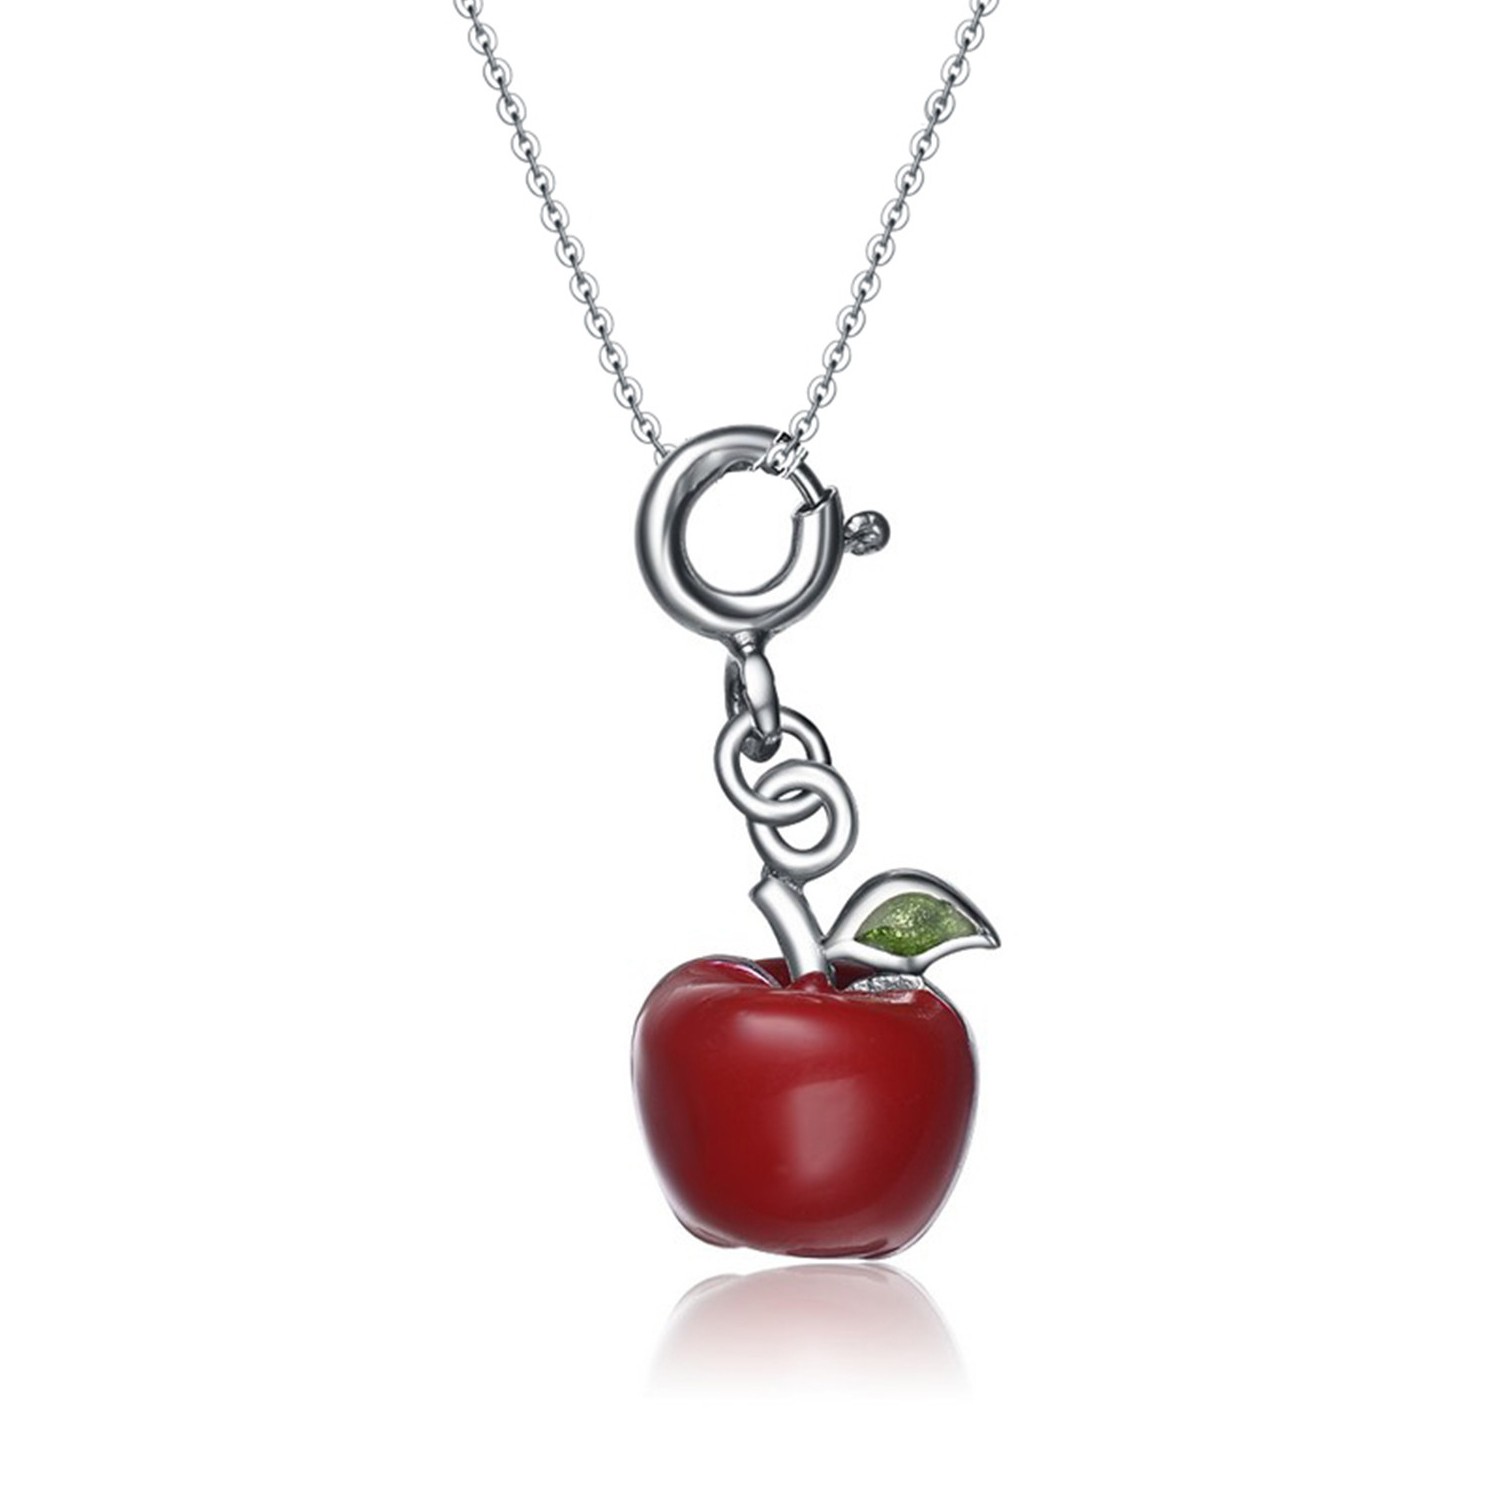 New Arrival 925 sterling silver rhodium plated jewelry fruit pendant necklace women jewelry 